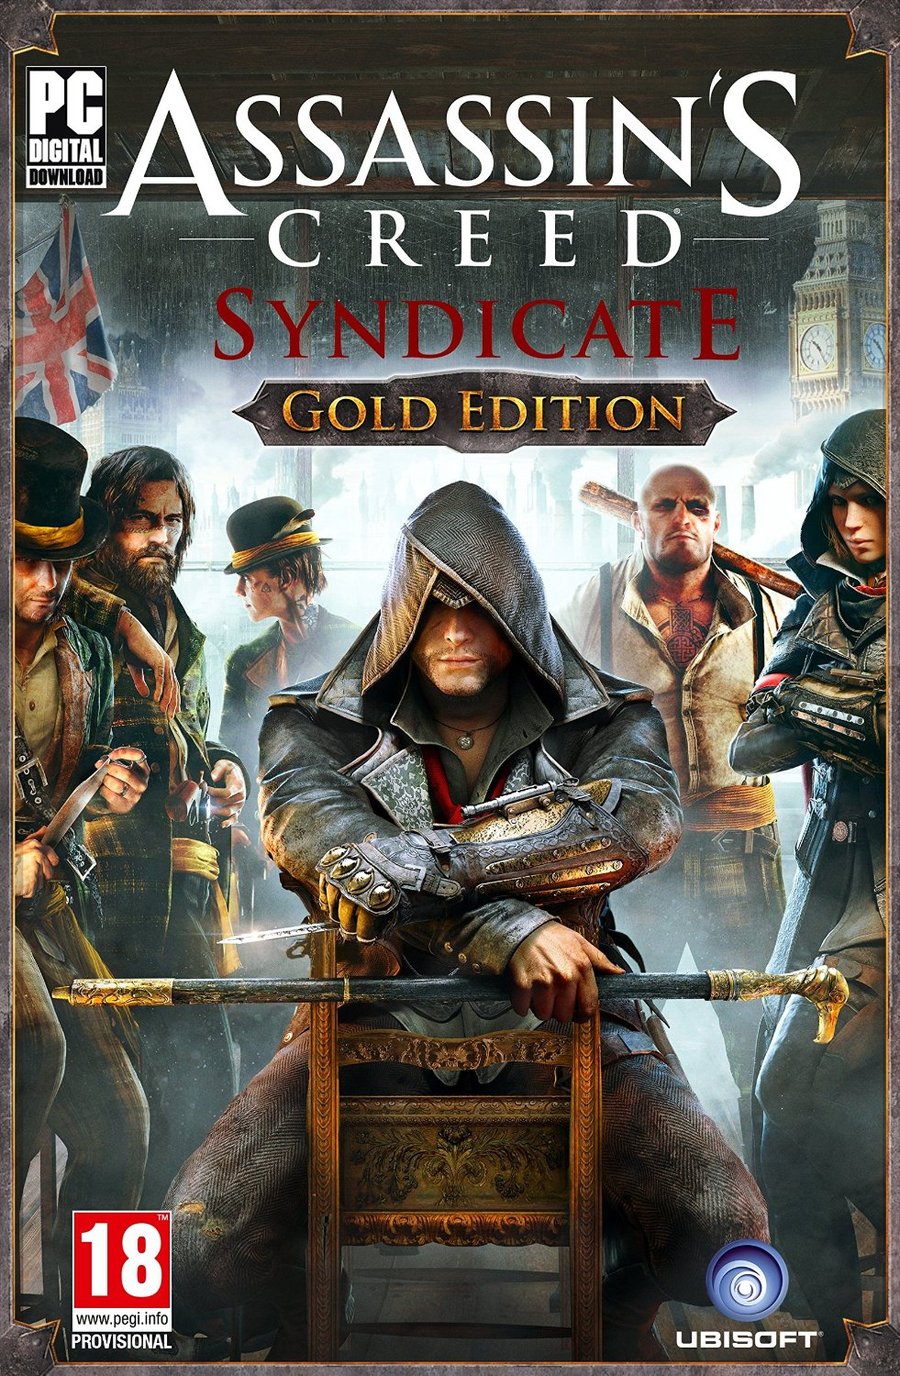 Assassins-creed-syndicate-1431507251969246